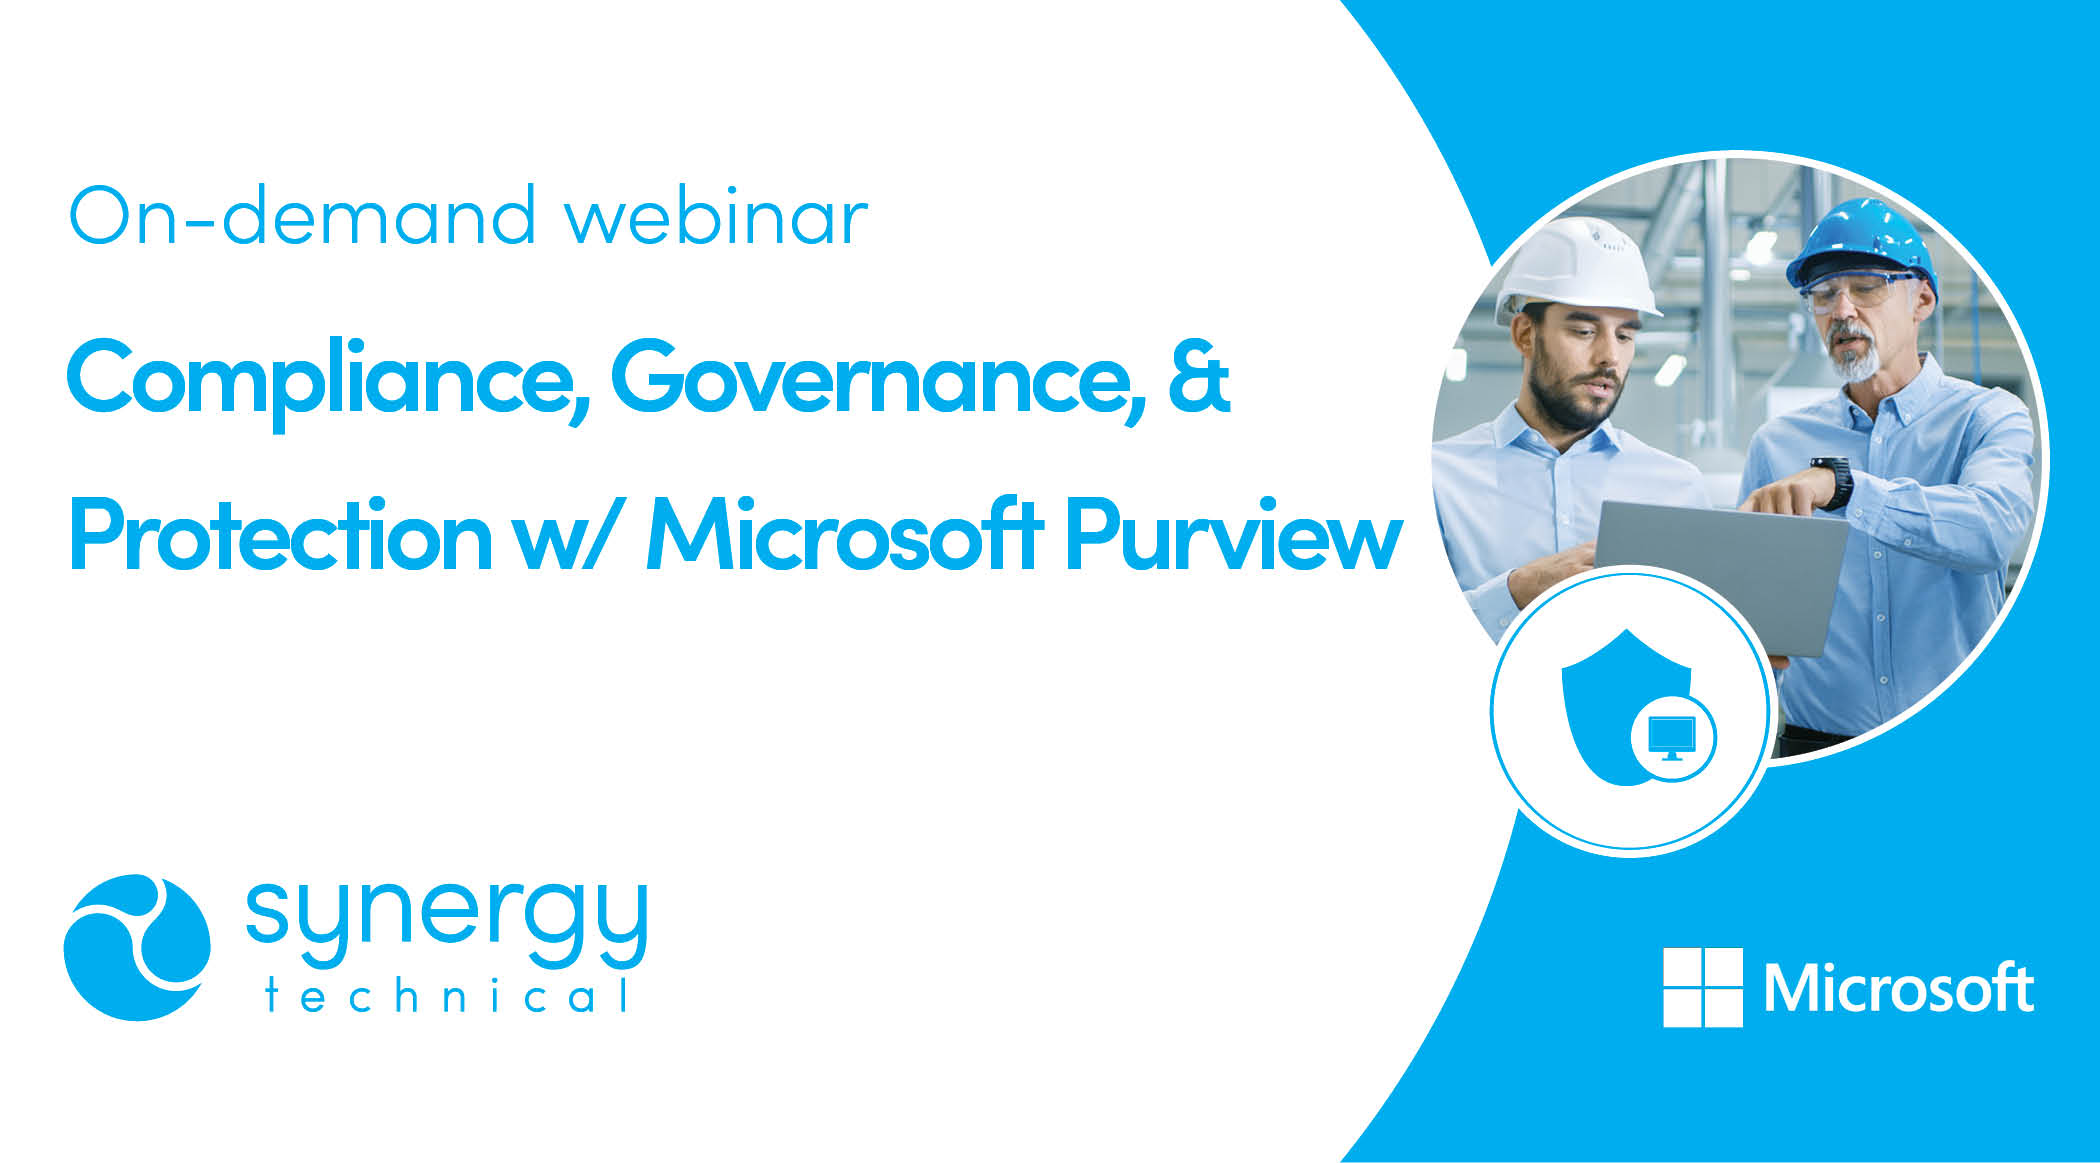 Introducing Microsoft Purview